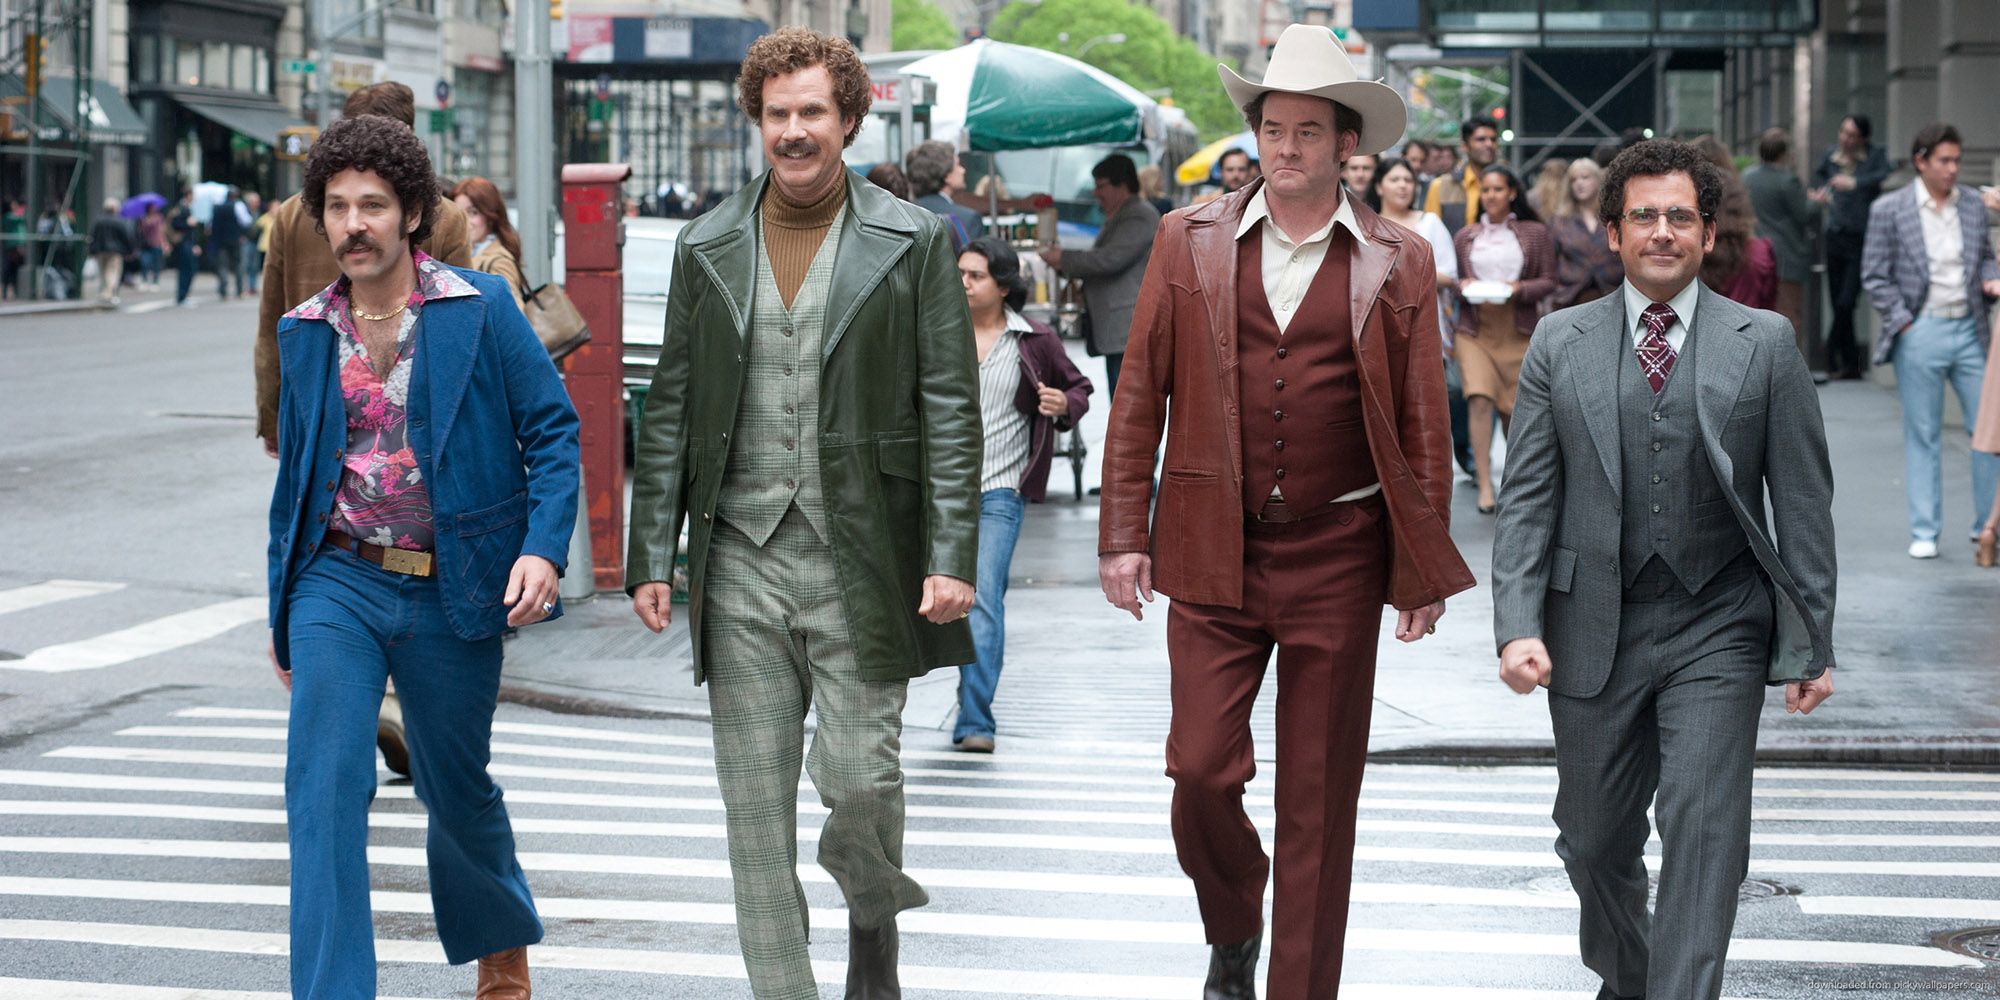 Paul Rudd, Will Ferrell, David Koechner, and Steve Carell in Anchorman 2: The Legend Continues